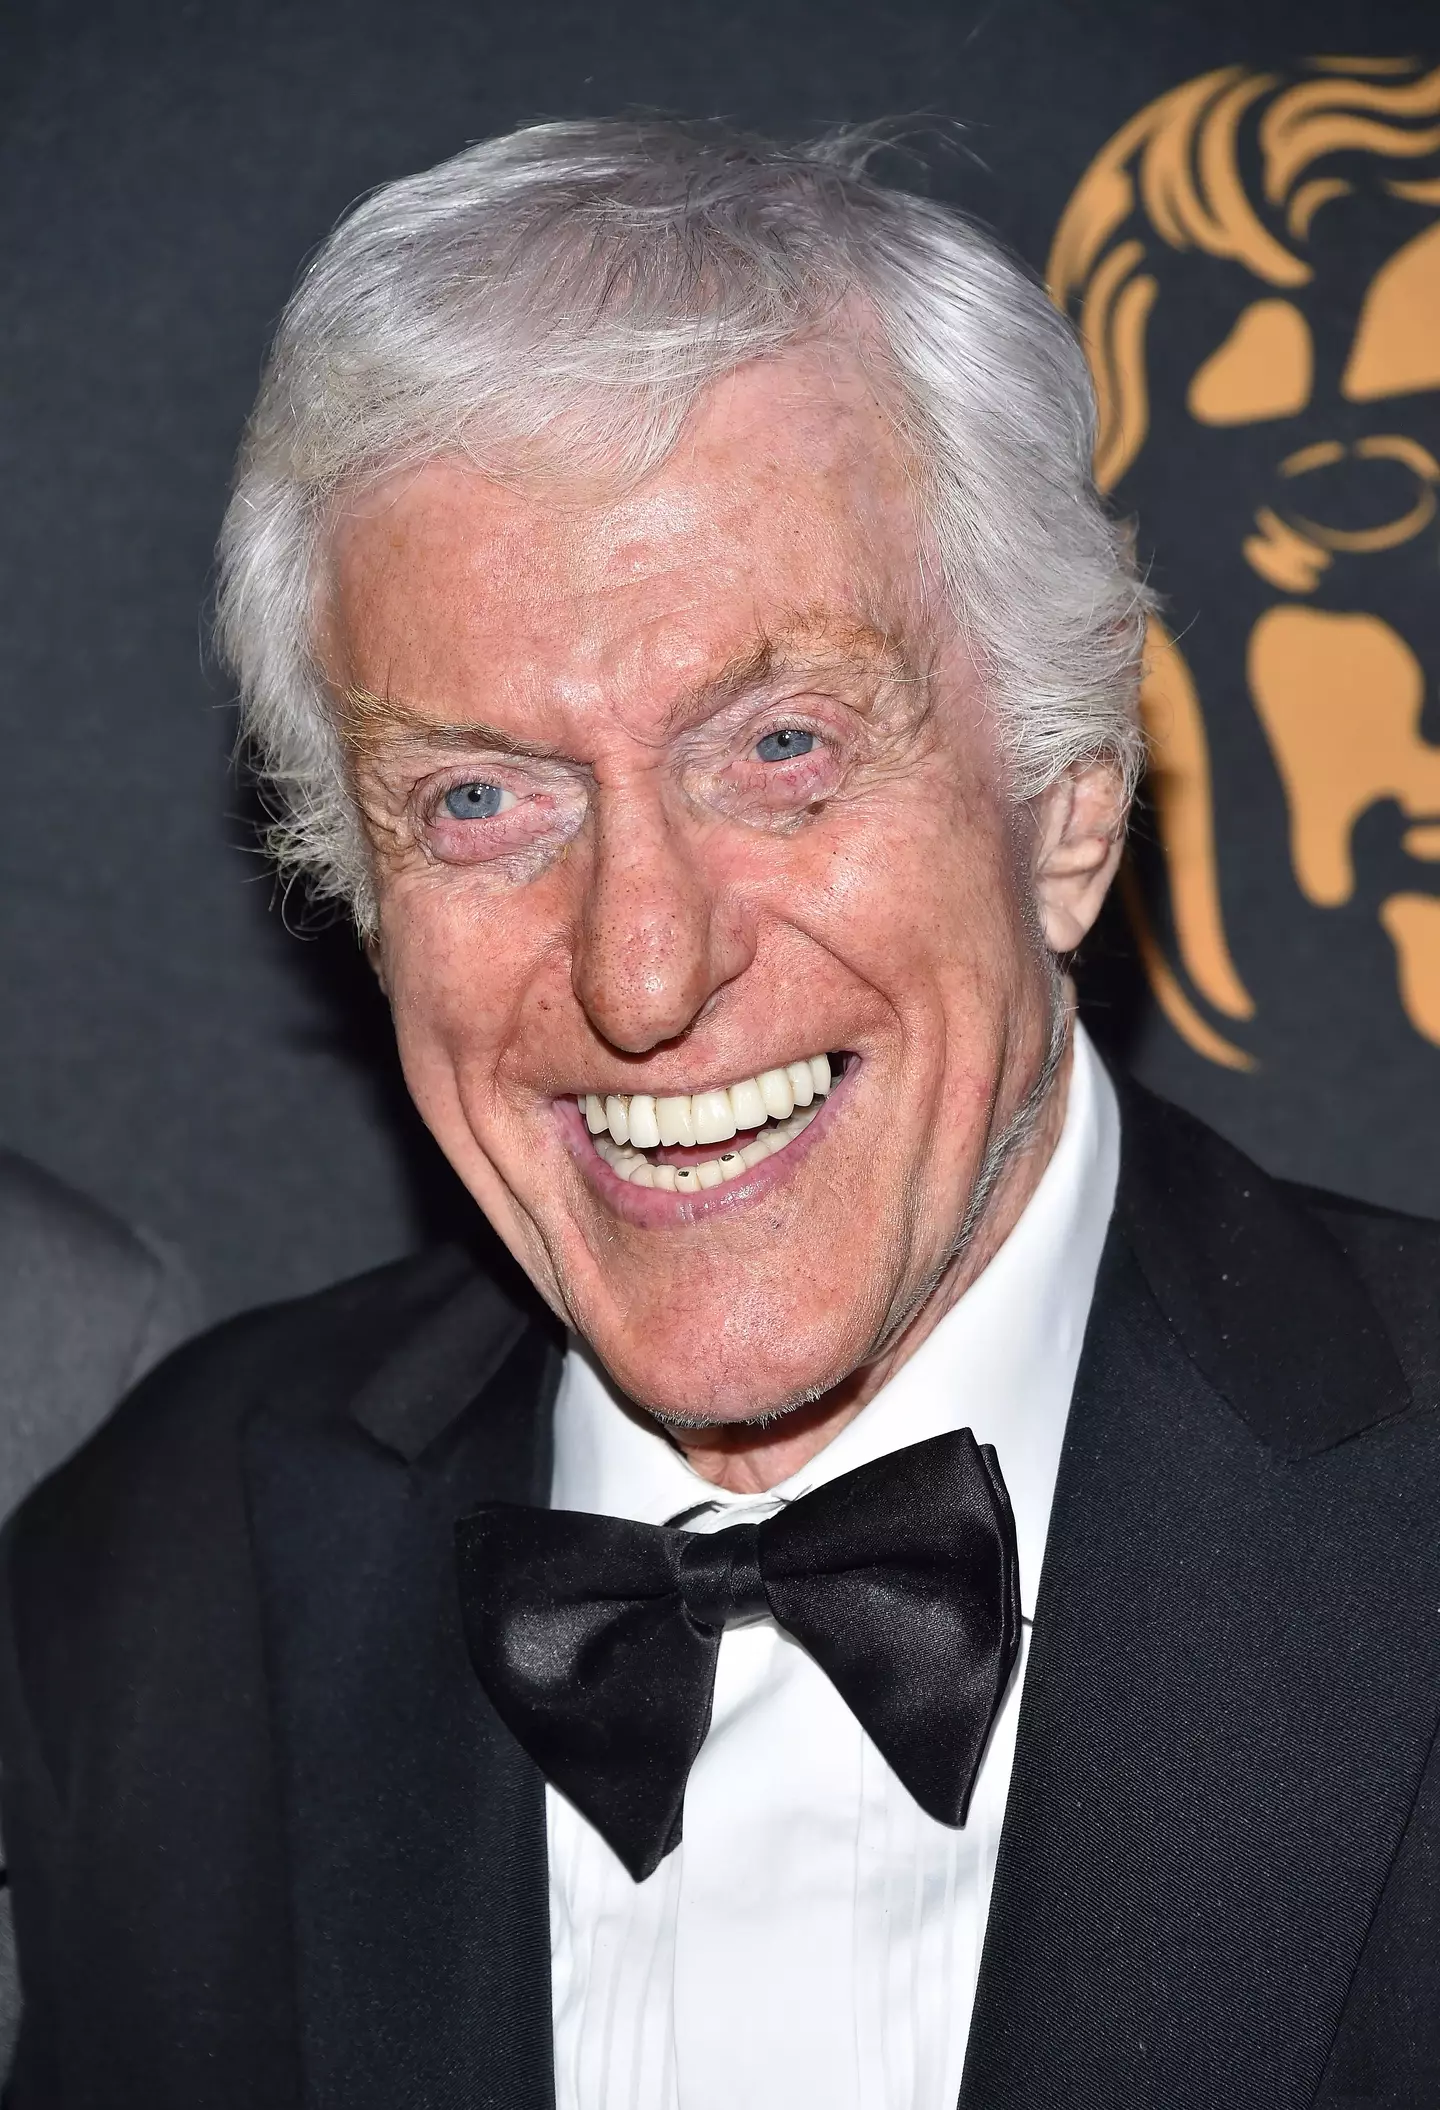 Dick Van Dyke is just happy to 'still be here'.